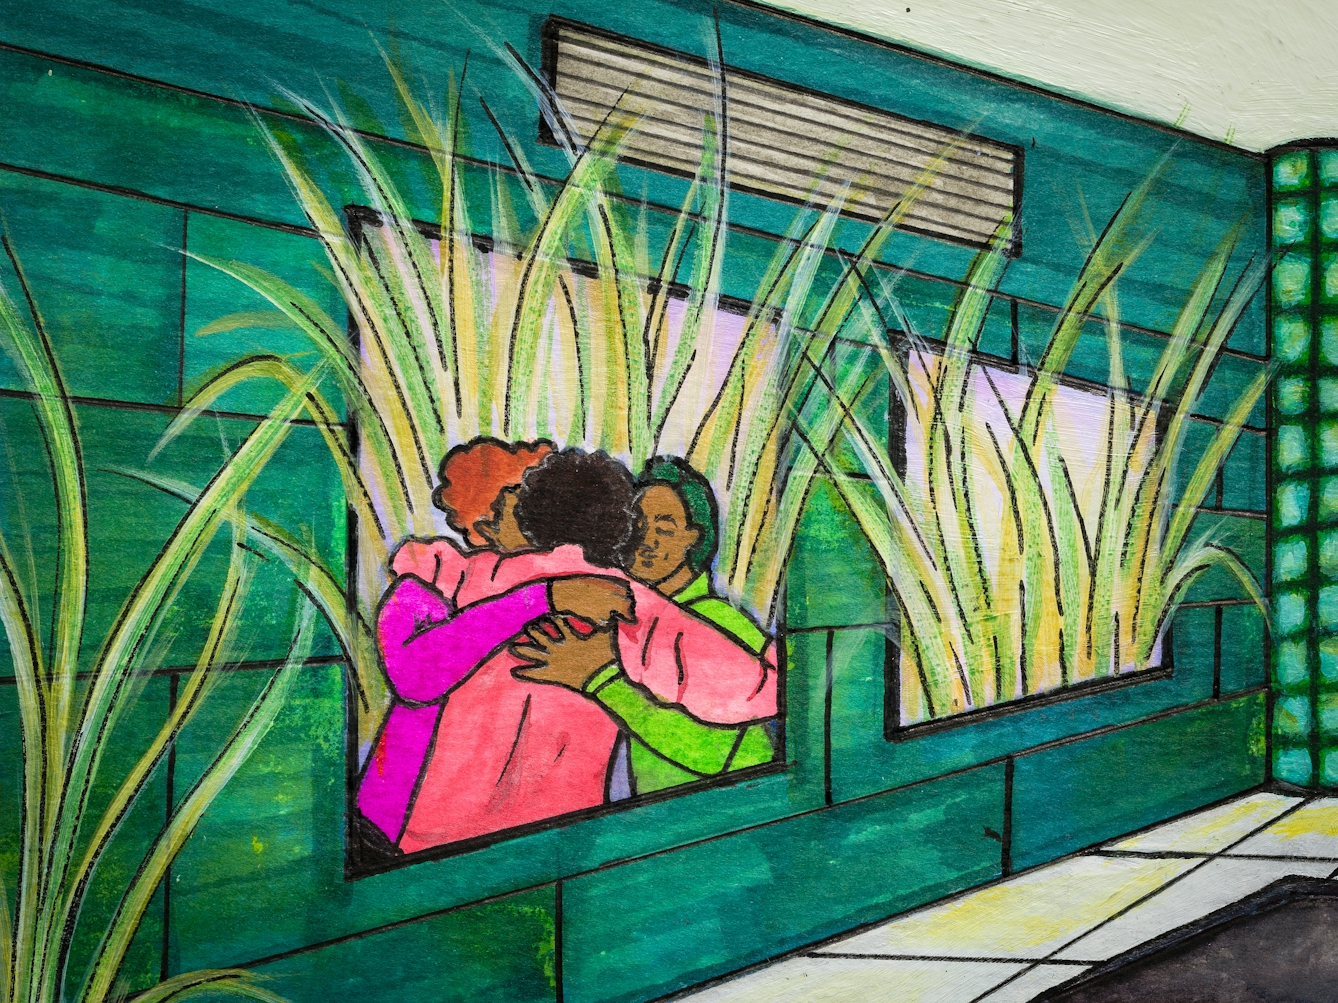 
Detail from larger artwork made with paint and ink on textured watercolour paper. The artwork shows two large windows full of plants and the natural world, and a group of 3 people hugging in a gesture of support and understanding.